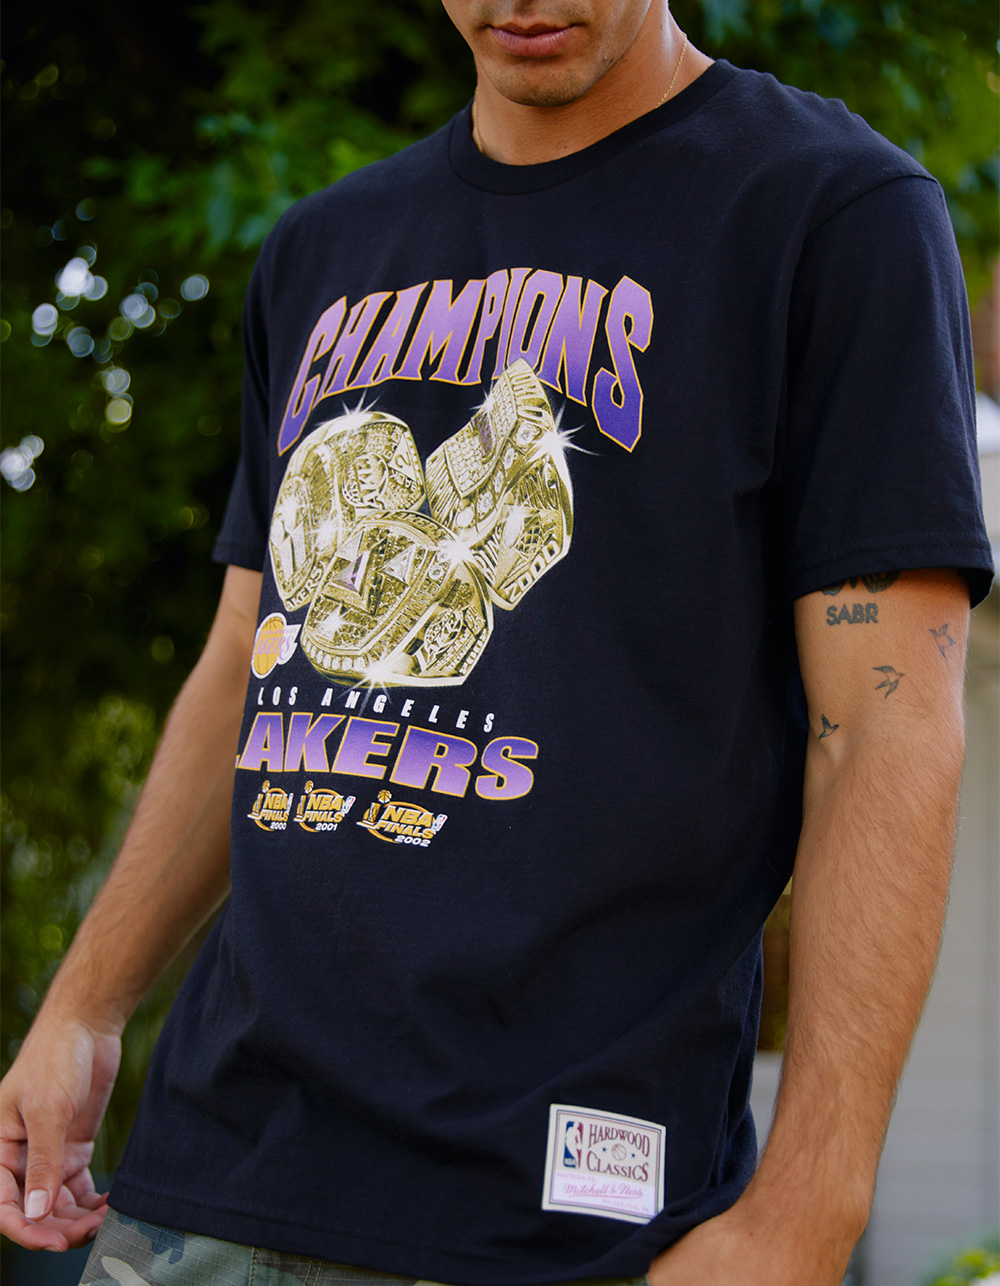 los angeles lakers mitchell and ness snapback